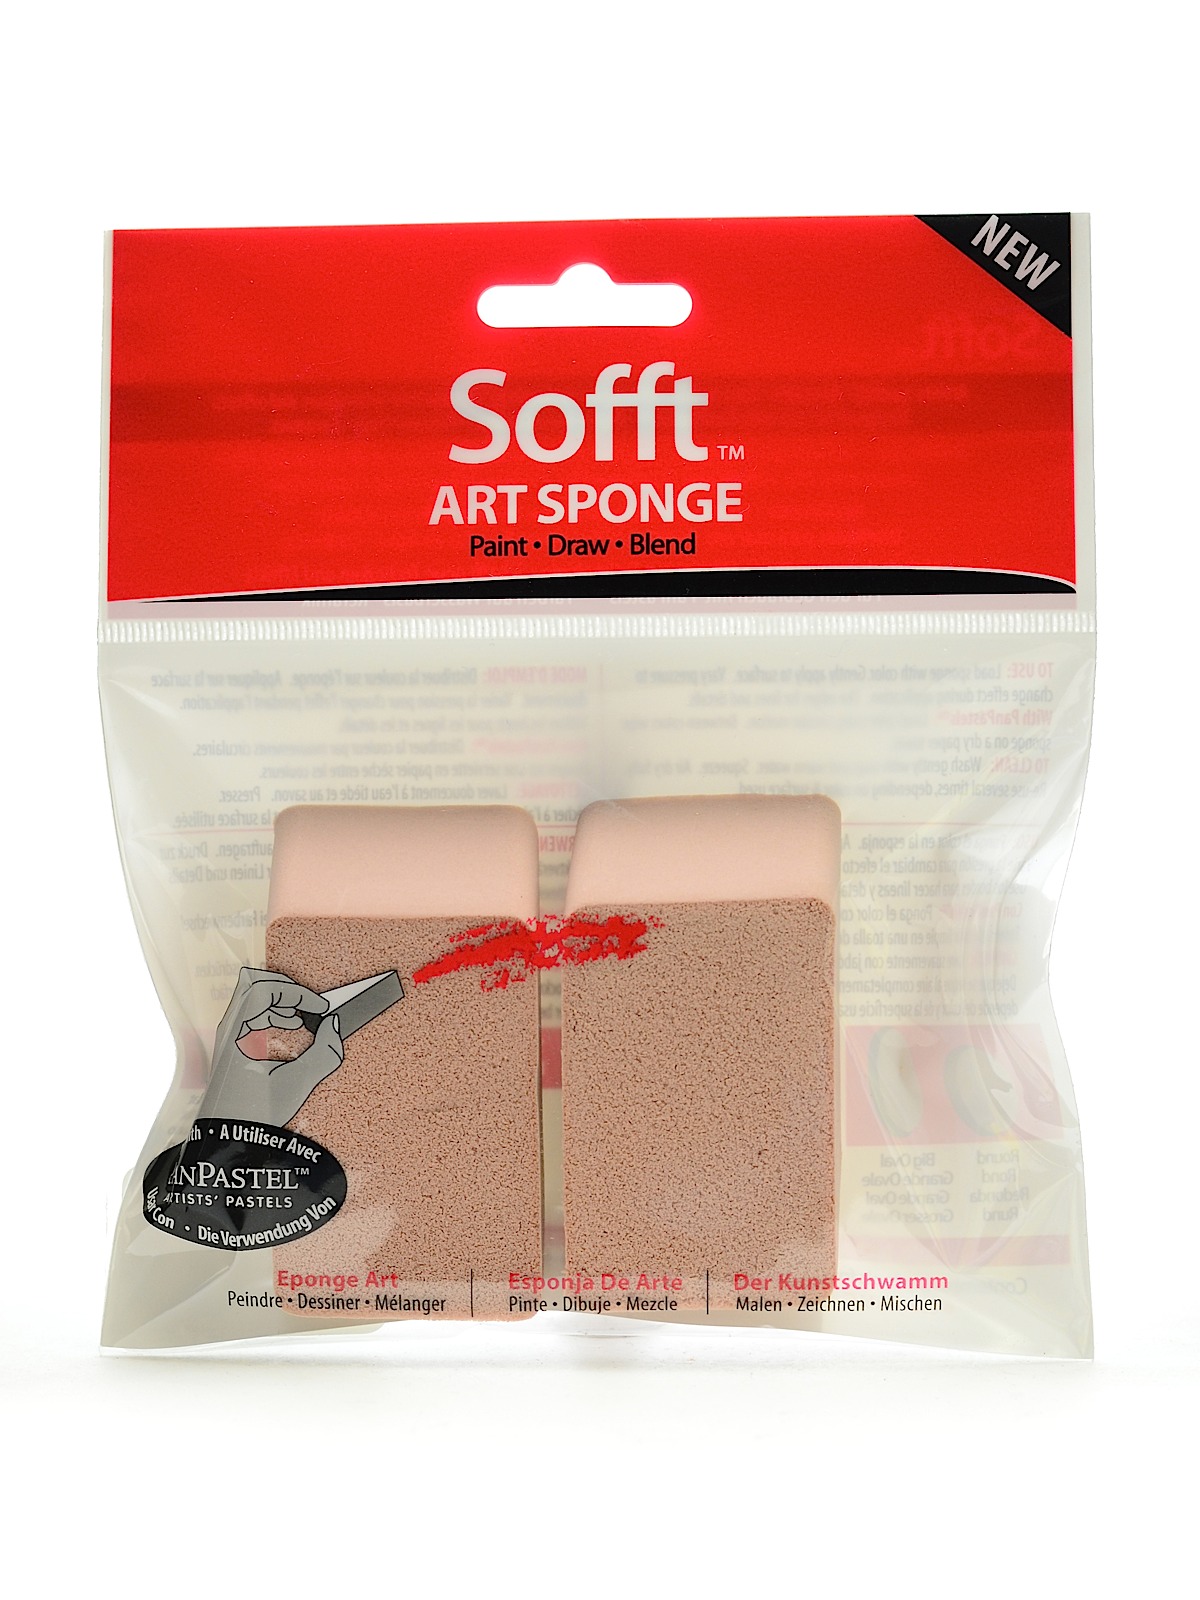 Colorfin Art Sponges Angle Slice Flat Pack Of 2